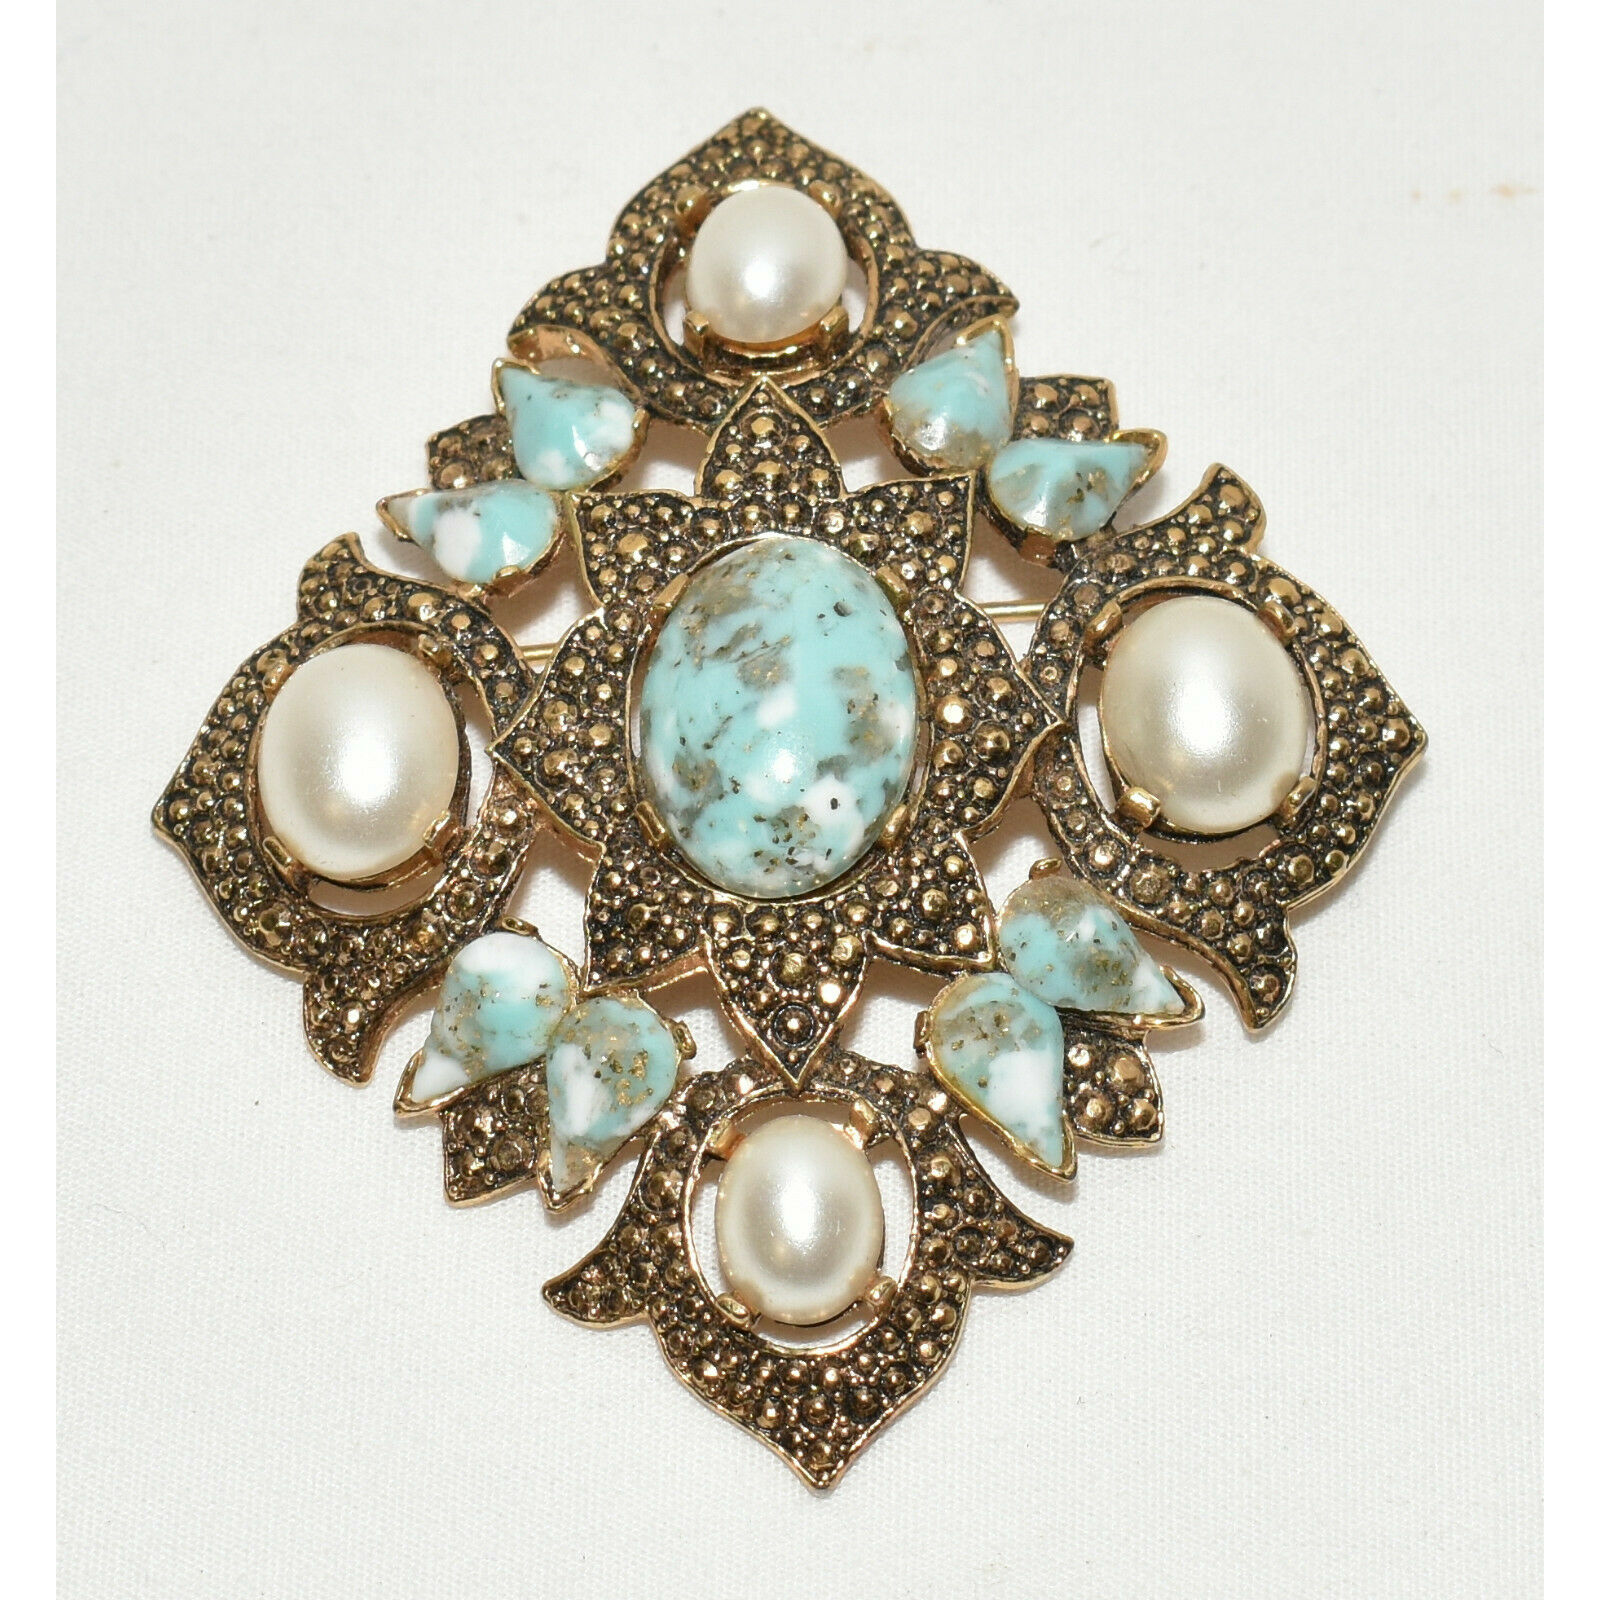 Vintage Turquoise Brooch, Turquoise Rock Brooch with Pin